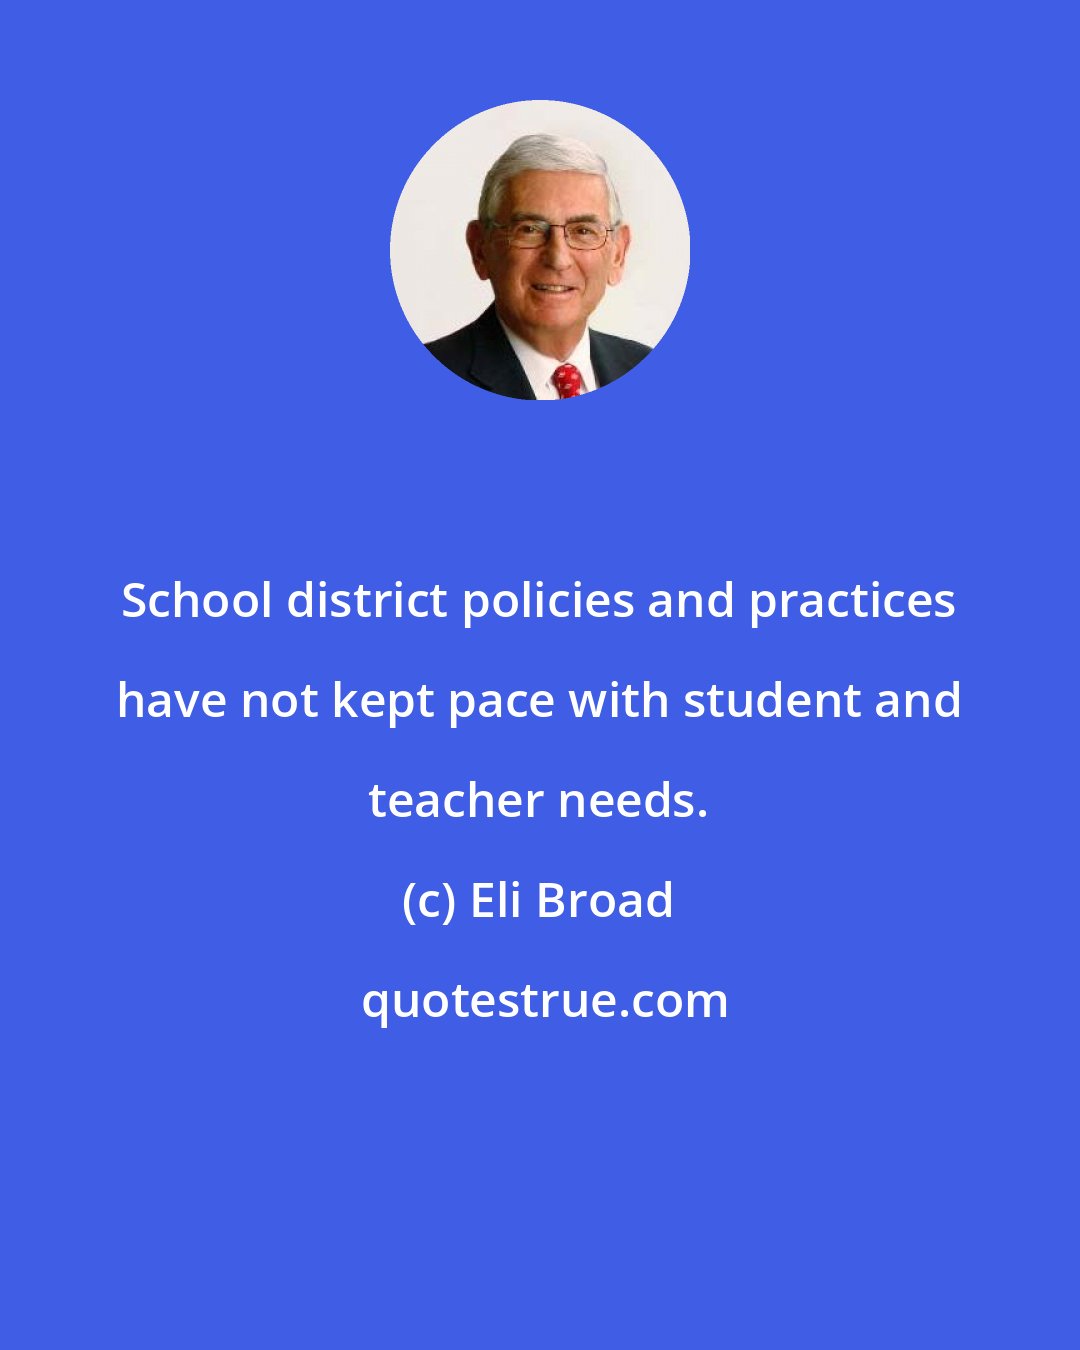 Eli Broad: School district policies and practices have not kept pace with student and teacher needs.